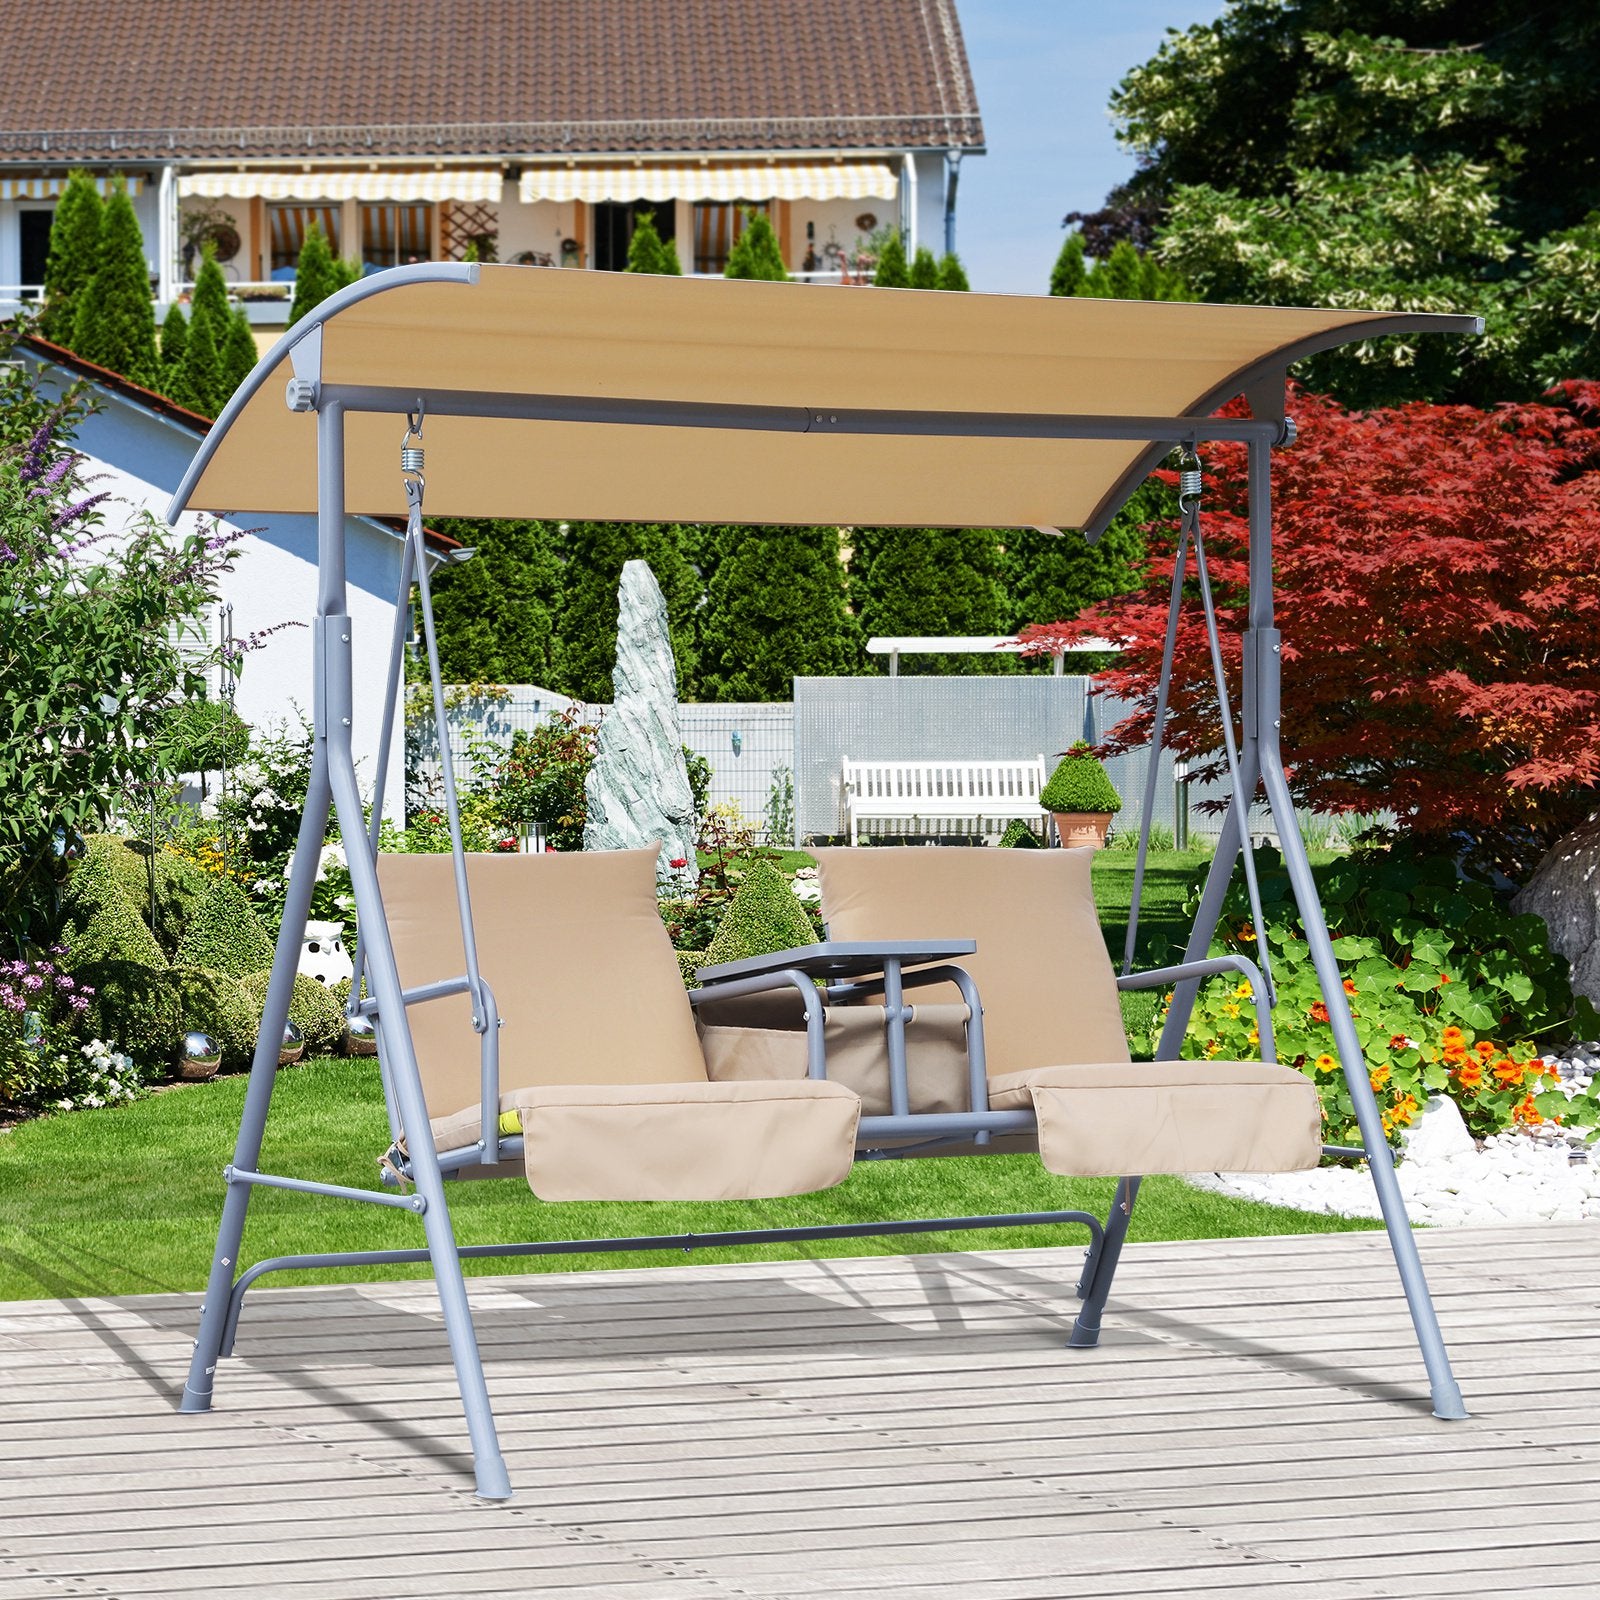 Outsunny 2 Seater Garden Swing Chair Patio Rocking Bench w/ Tilting Canopy, Double Padded Seats, Storage Bag and Tray, Beige - Inspirely